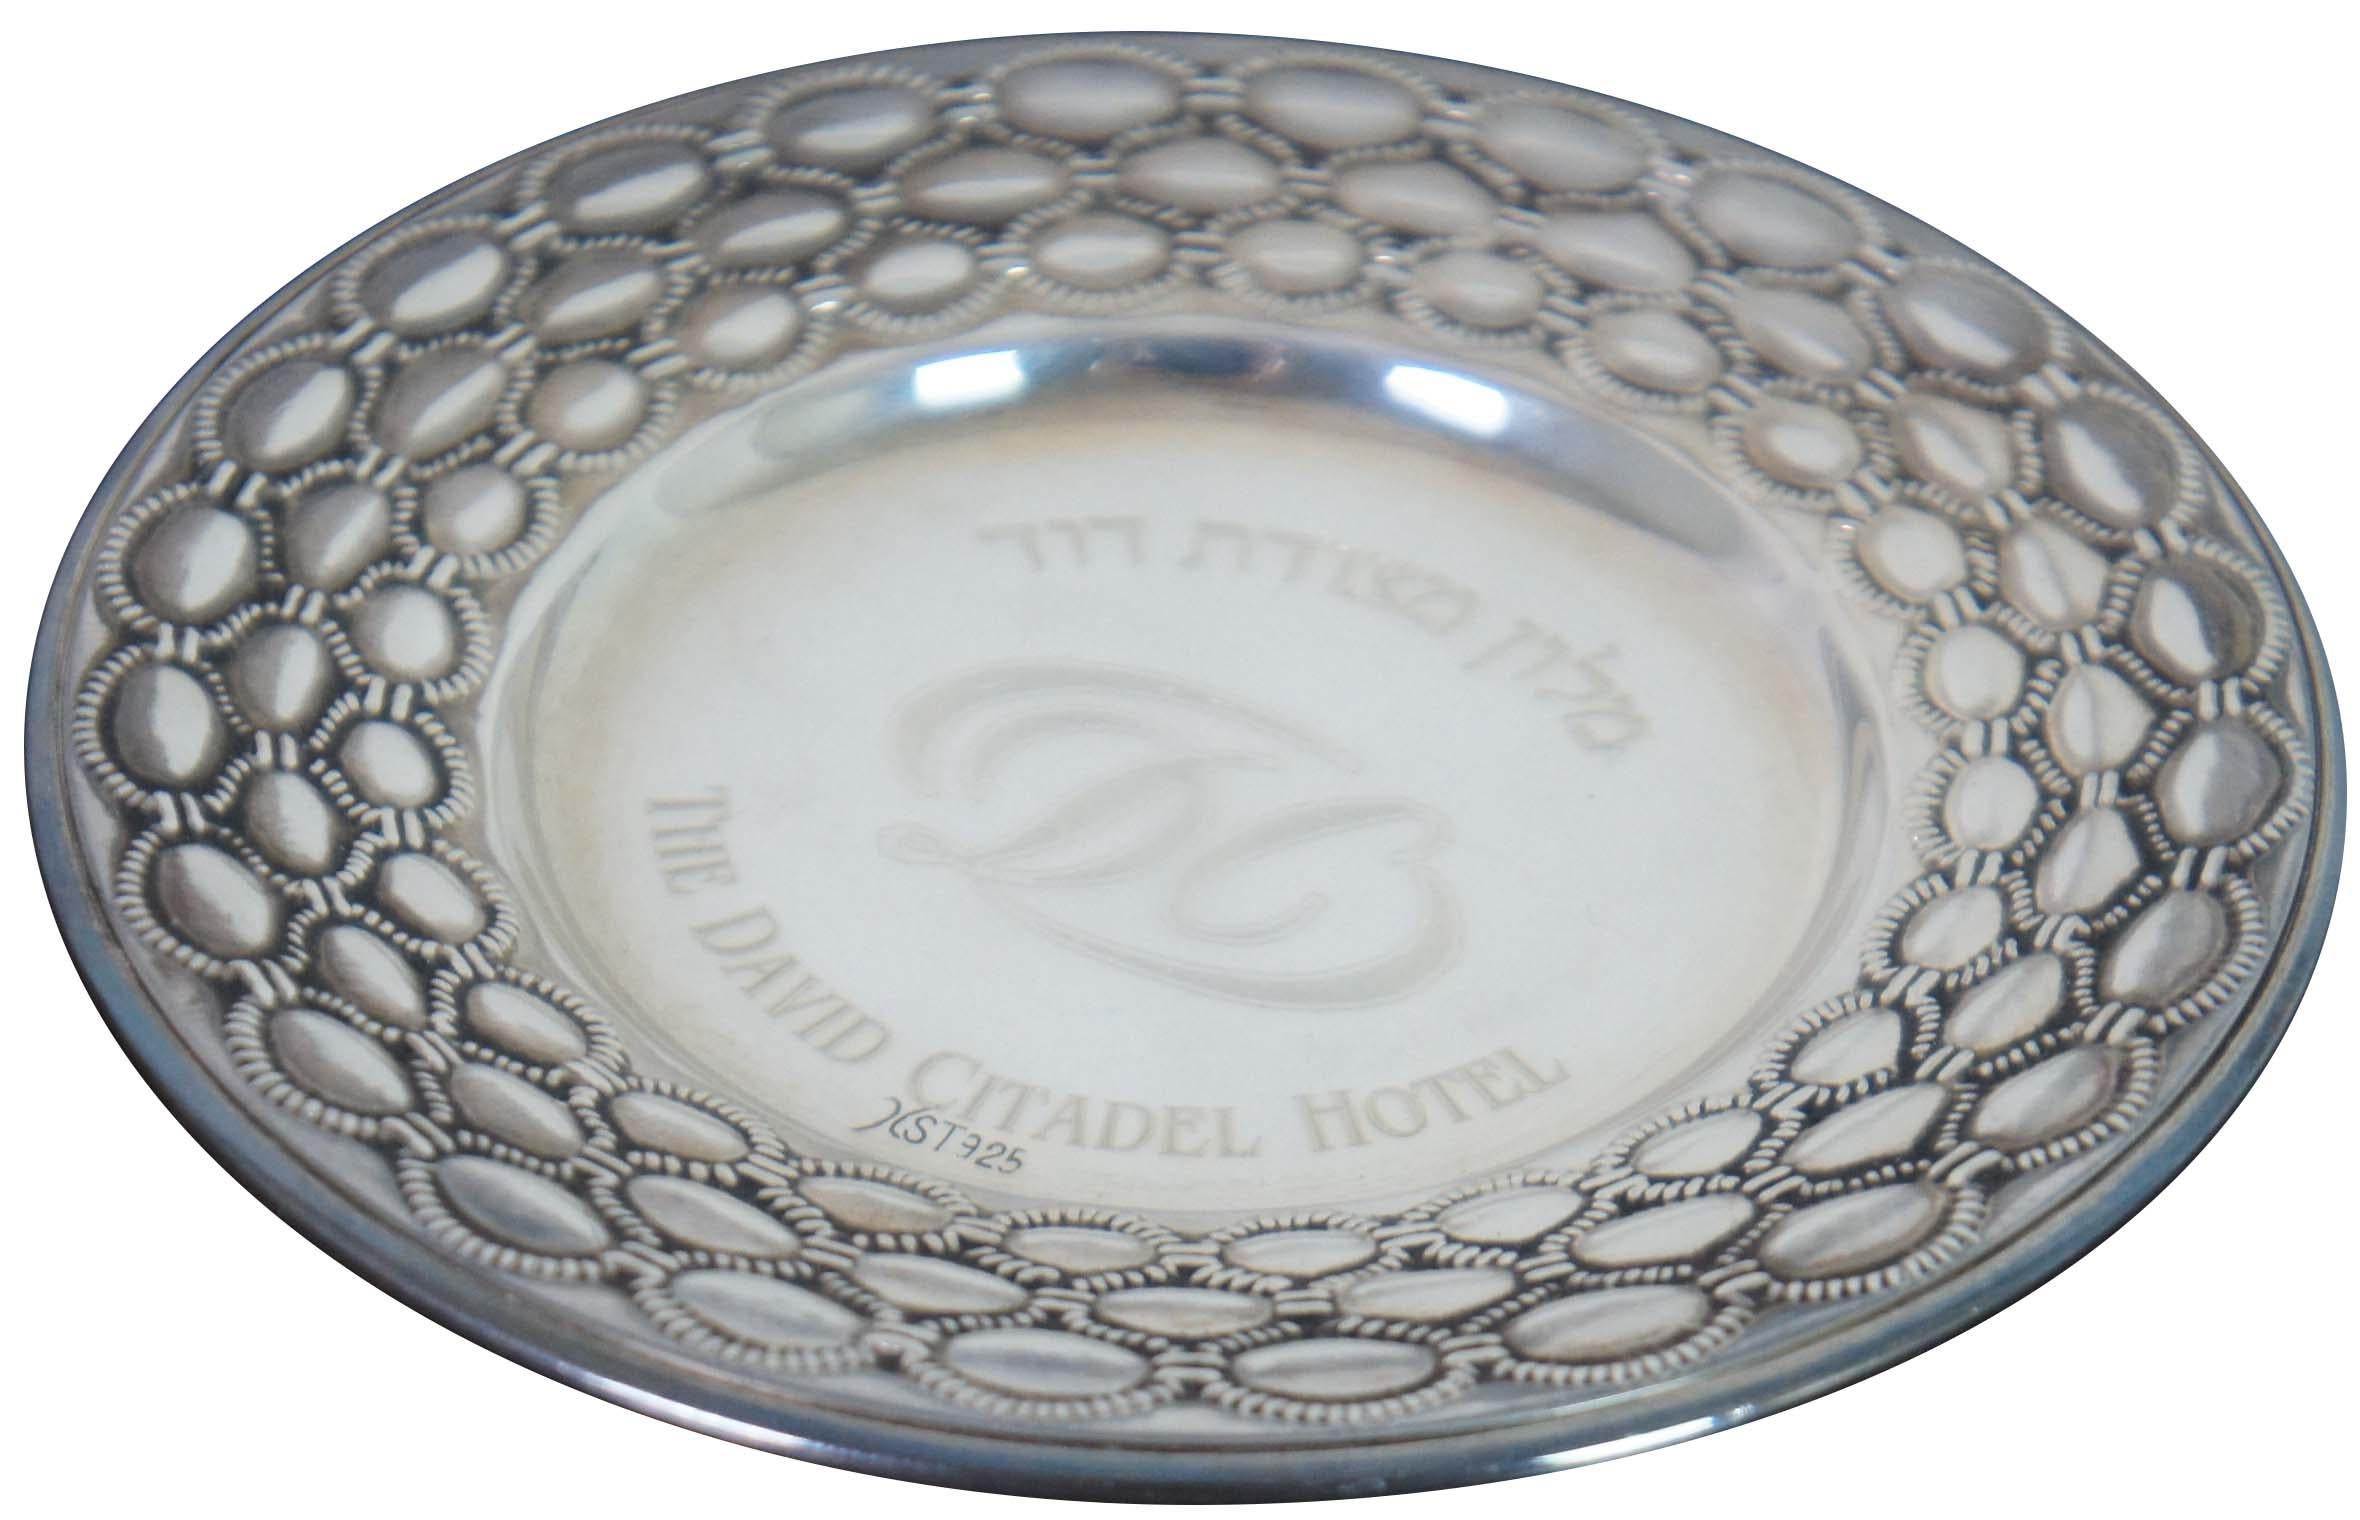 Vintage 925 sterling silver trinket dish or small plate from The David Citadel Hotel in Jerusalem with decorative beaded design around the outside edge.

4” / 31 g (Diameter).